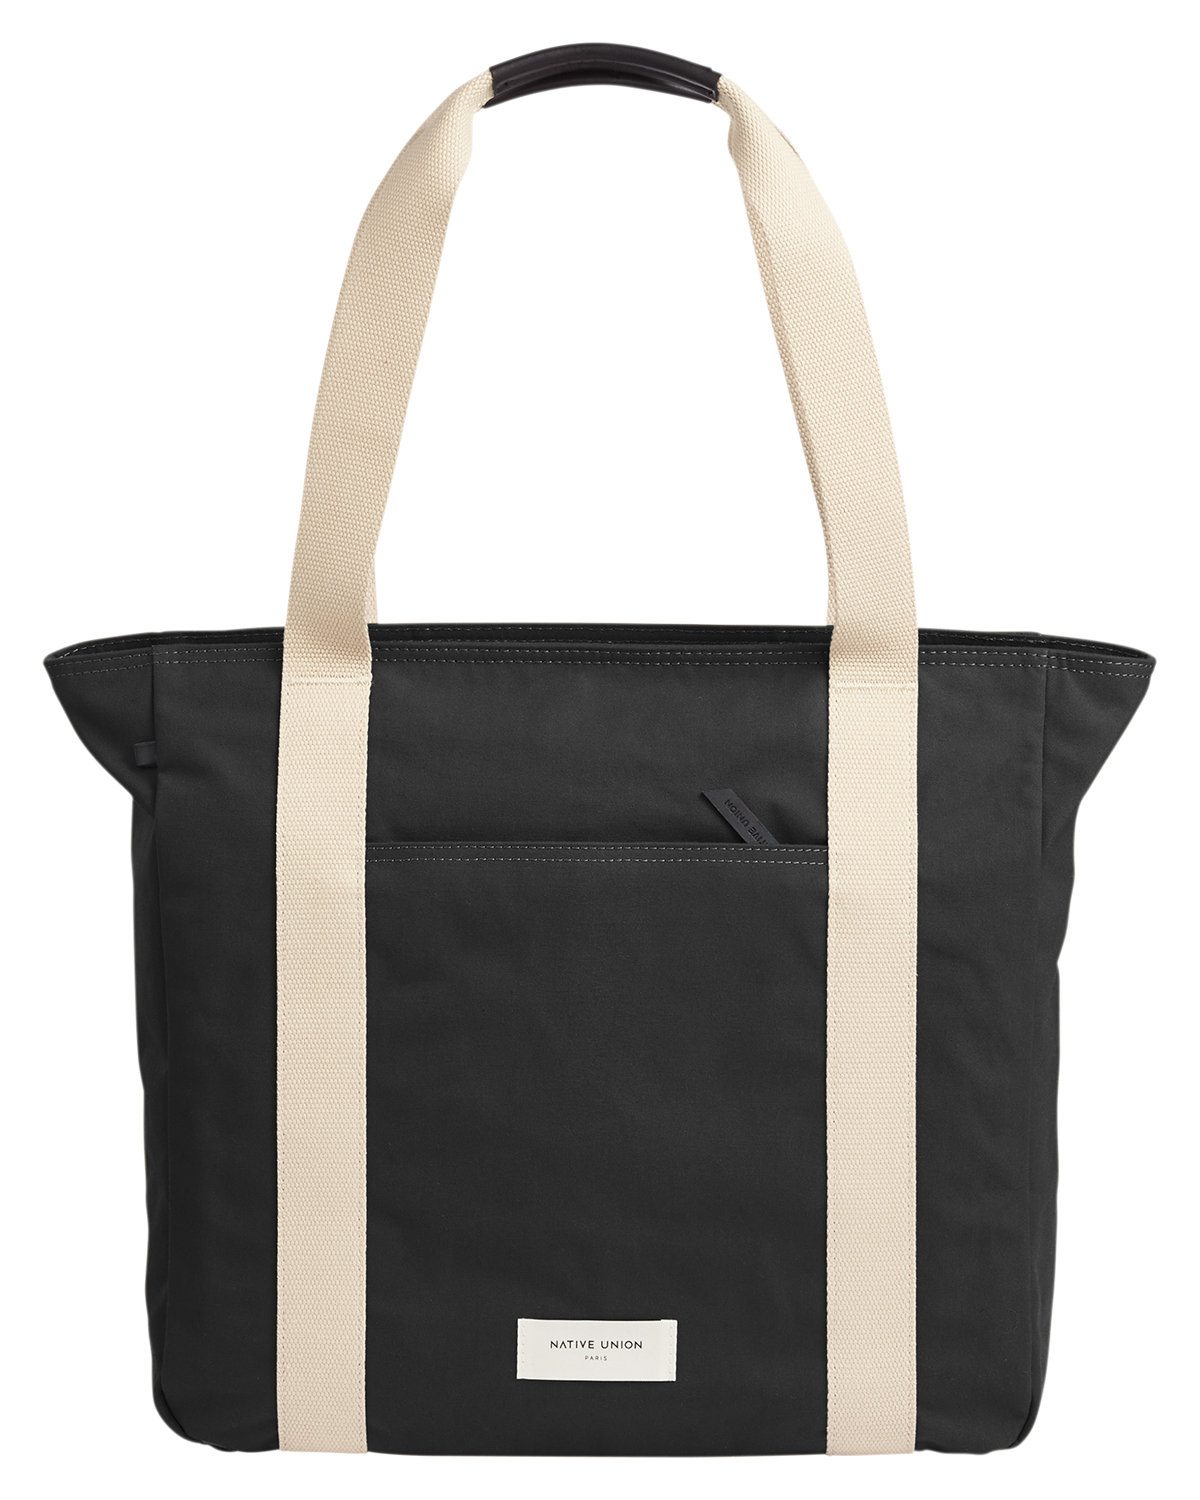 Work From Anywhere Tote Bag-Native Union